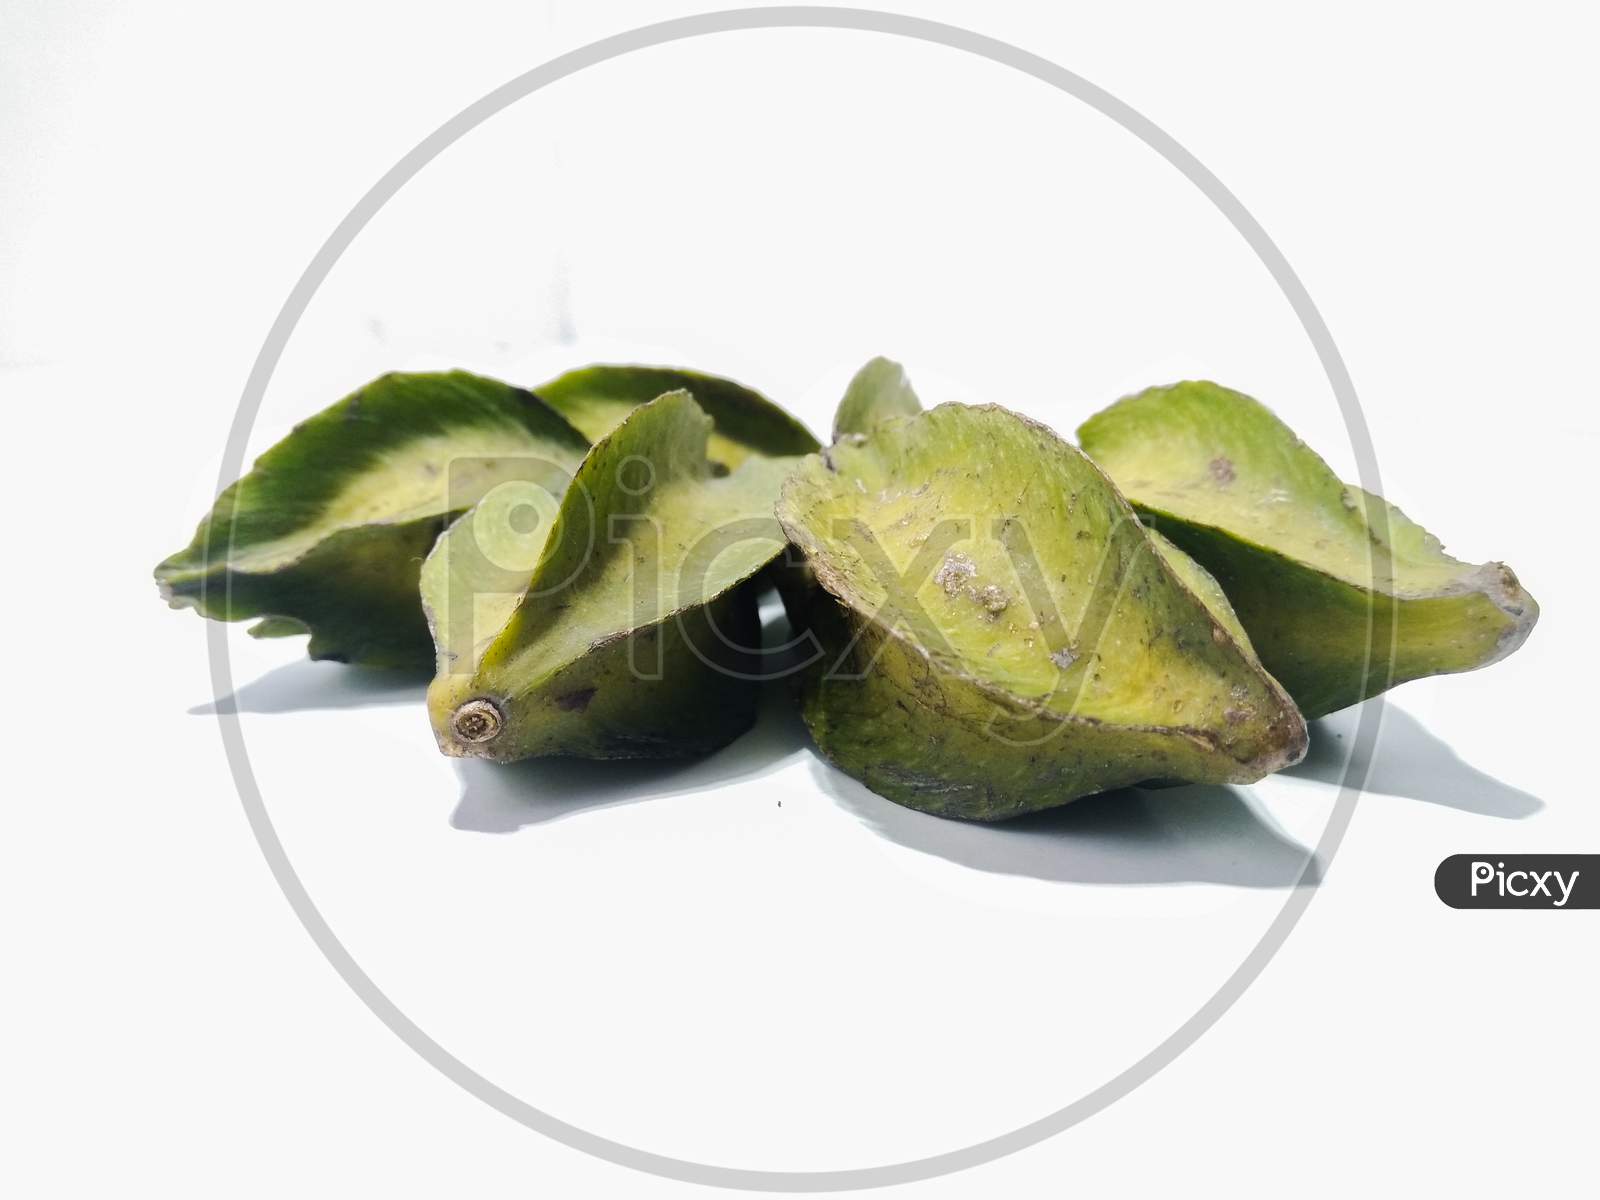 Green Star Fruit Or Carambola Fruit Over an Isolated White Background